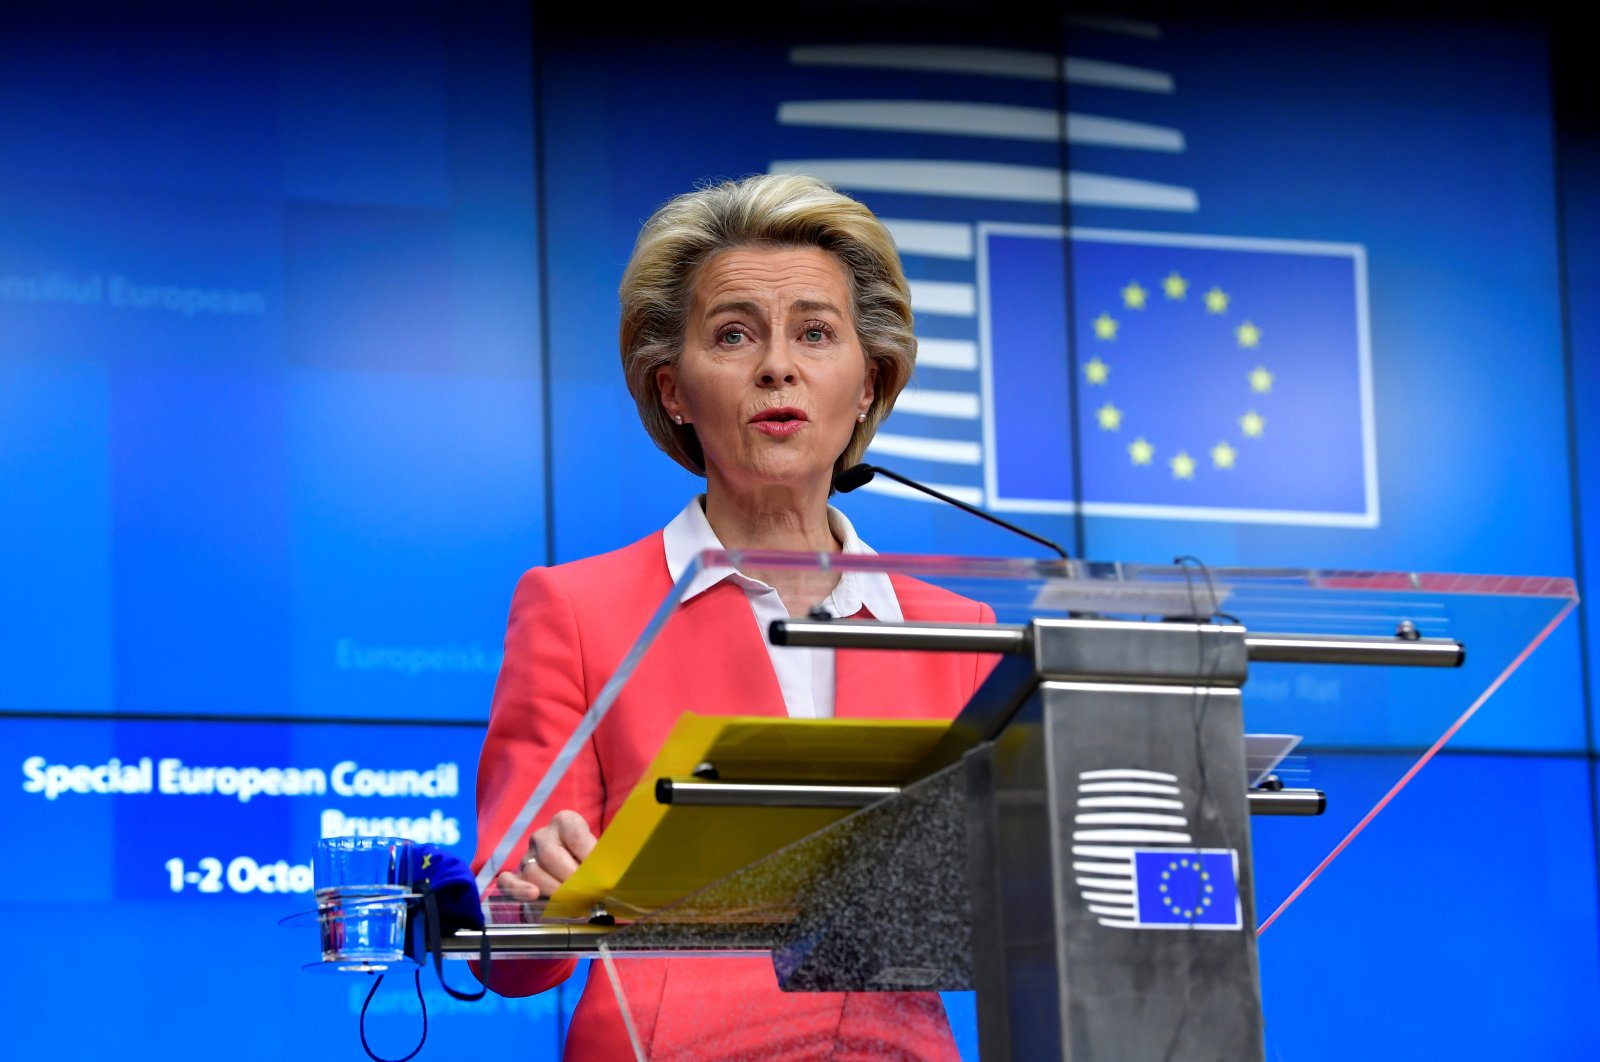 European Commission President Ursula von der Leyen addresses the media on the second day of a European Union leaders summit at the Europa building, Brussels, Oct. 2, 2020. (REUTERS Photo)